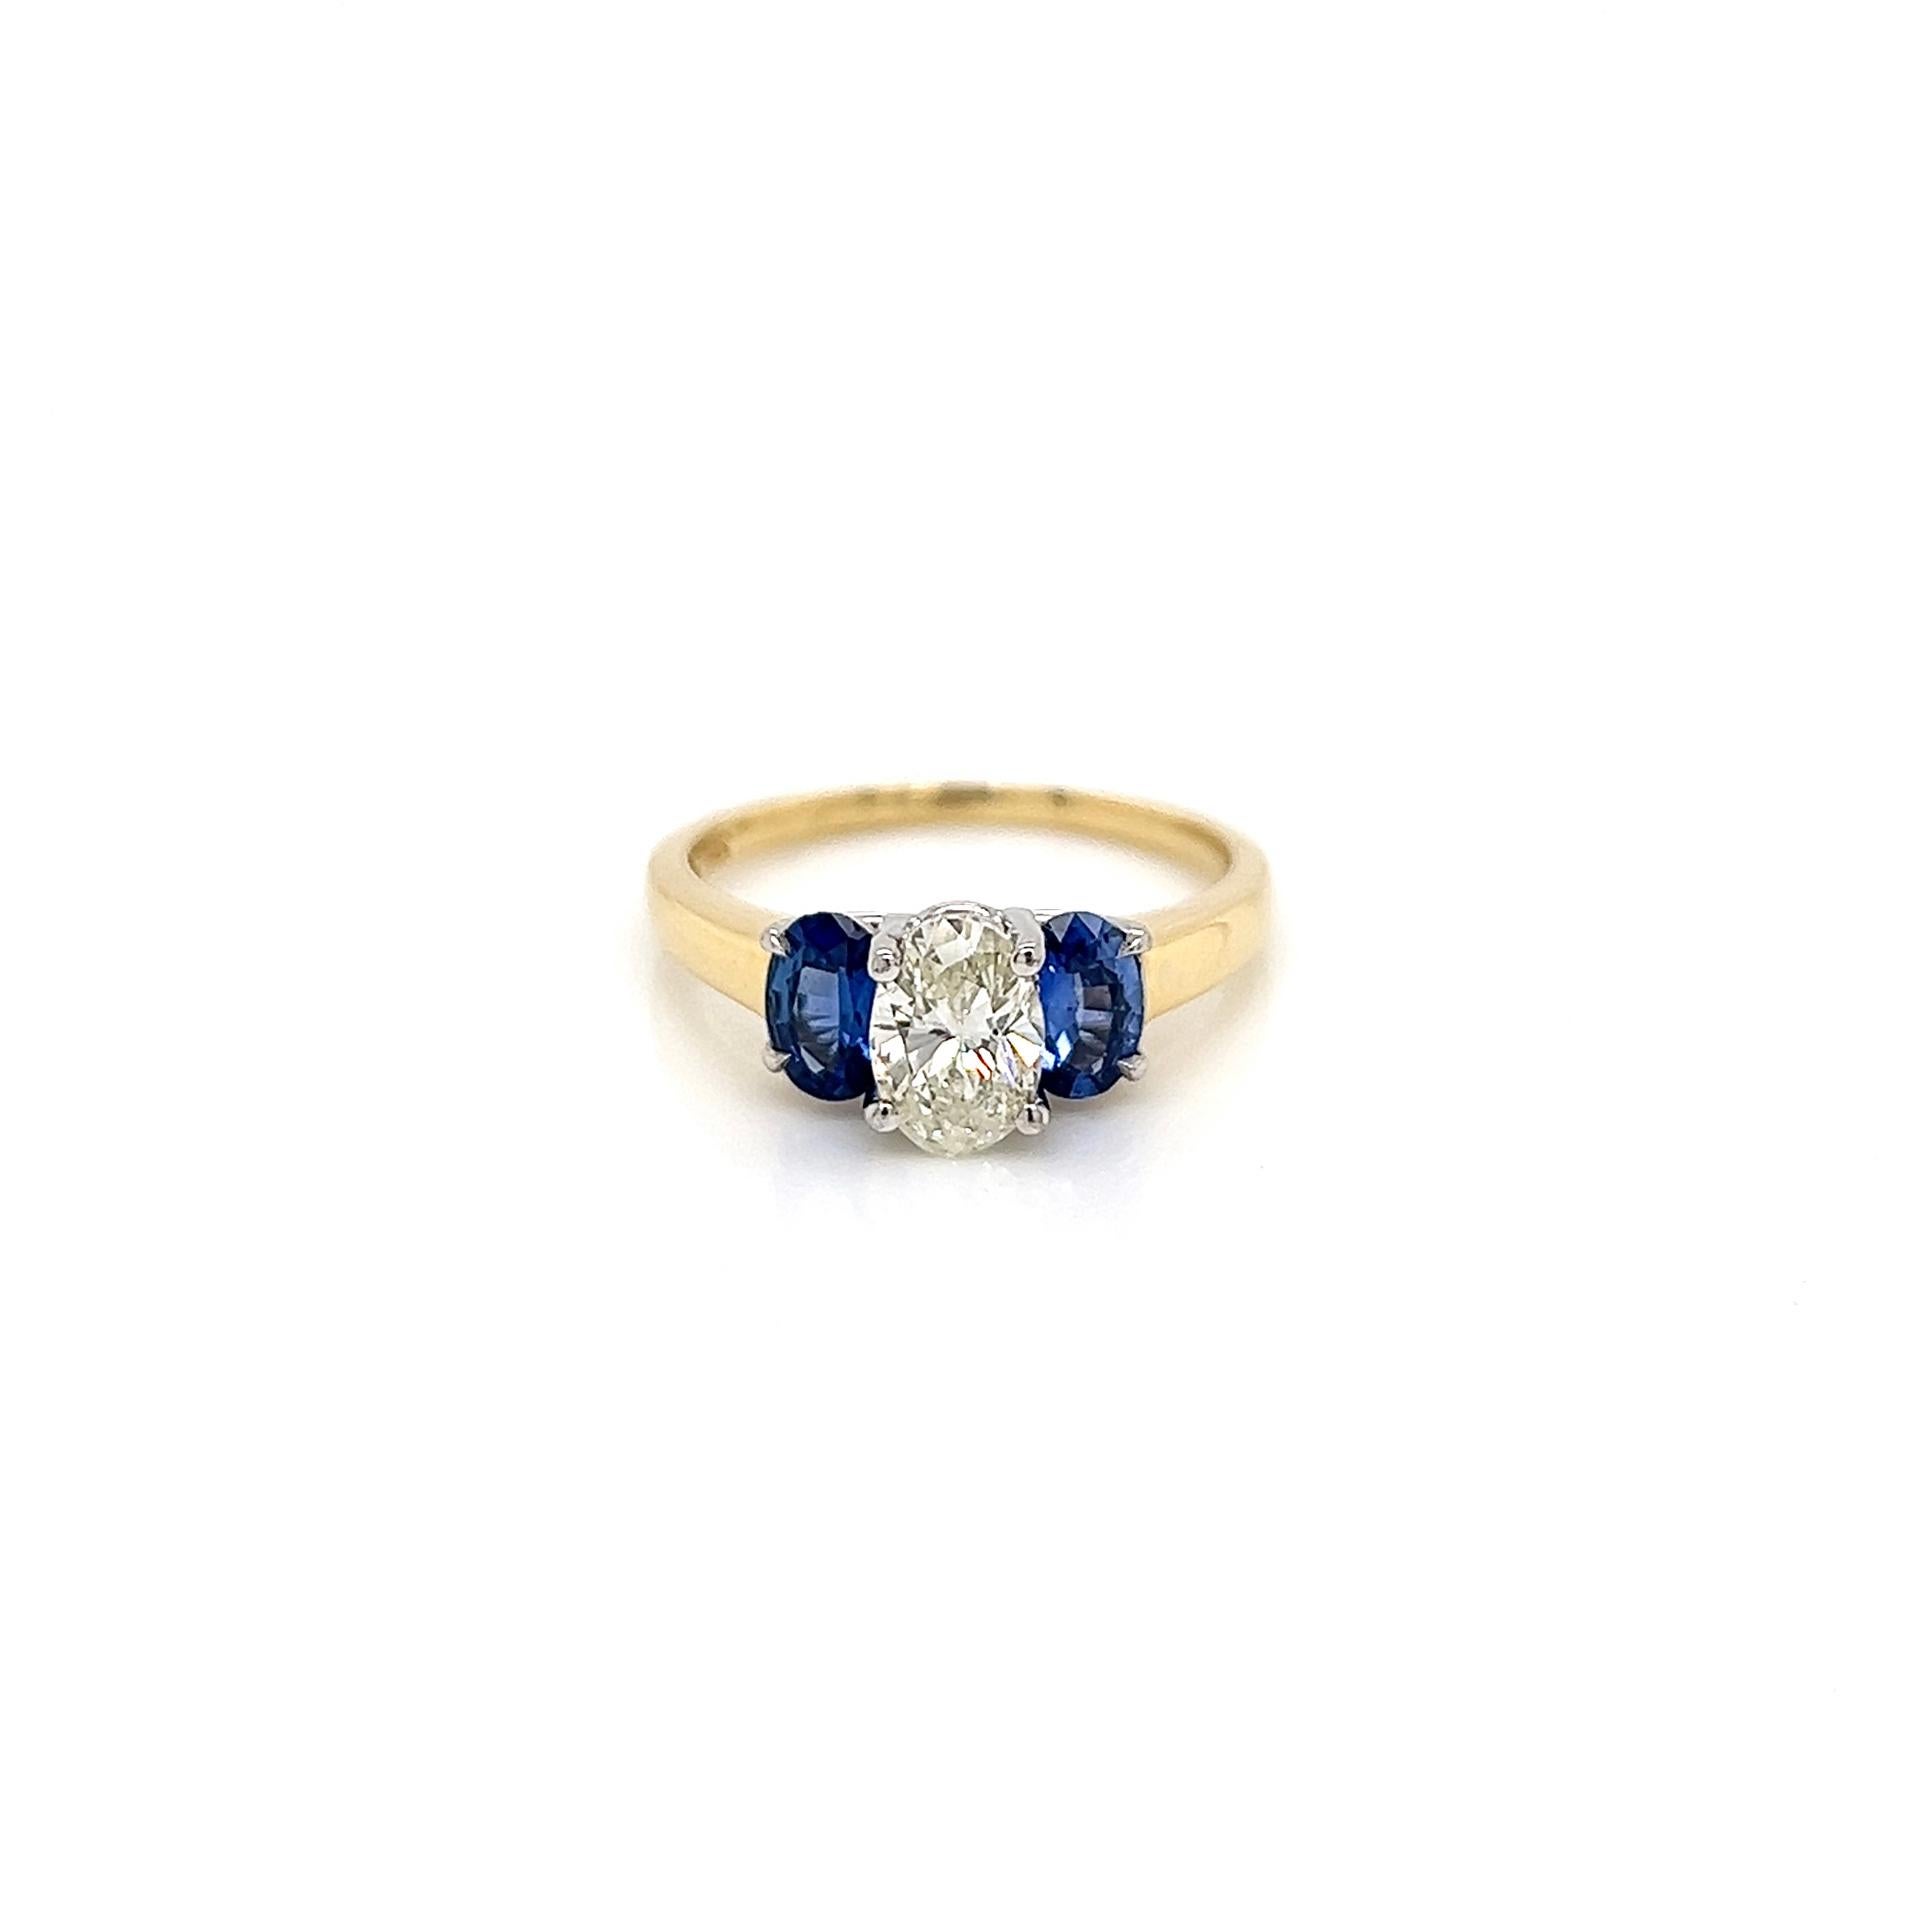 1.85 Total Carat Sapphire Diamond Ladies Ring

-Metal Type: 14K Two-Tone
-0.76 Carat Oval Cut Blue Sapphire
-1.09 Carat Oval Cut Natural Diamond
-Size 7.0

Made in New York City.